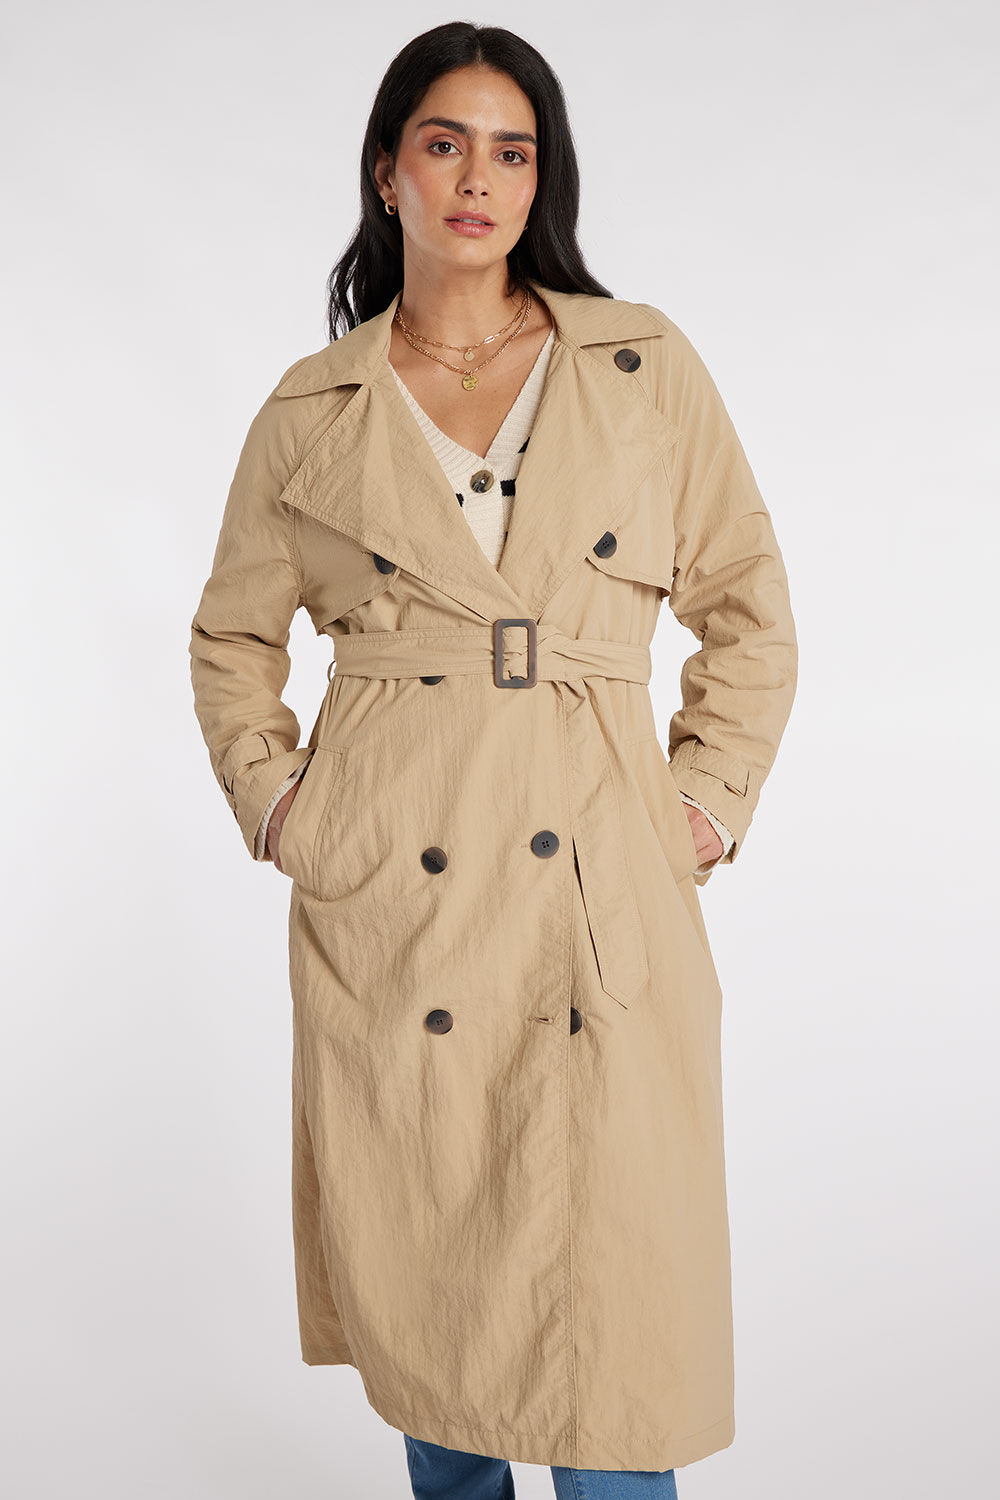 Brave Soul Tan - Trench Style Coat, Size: 10